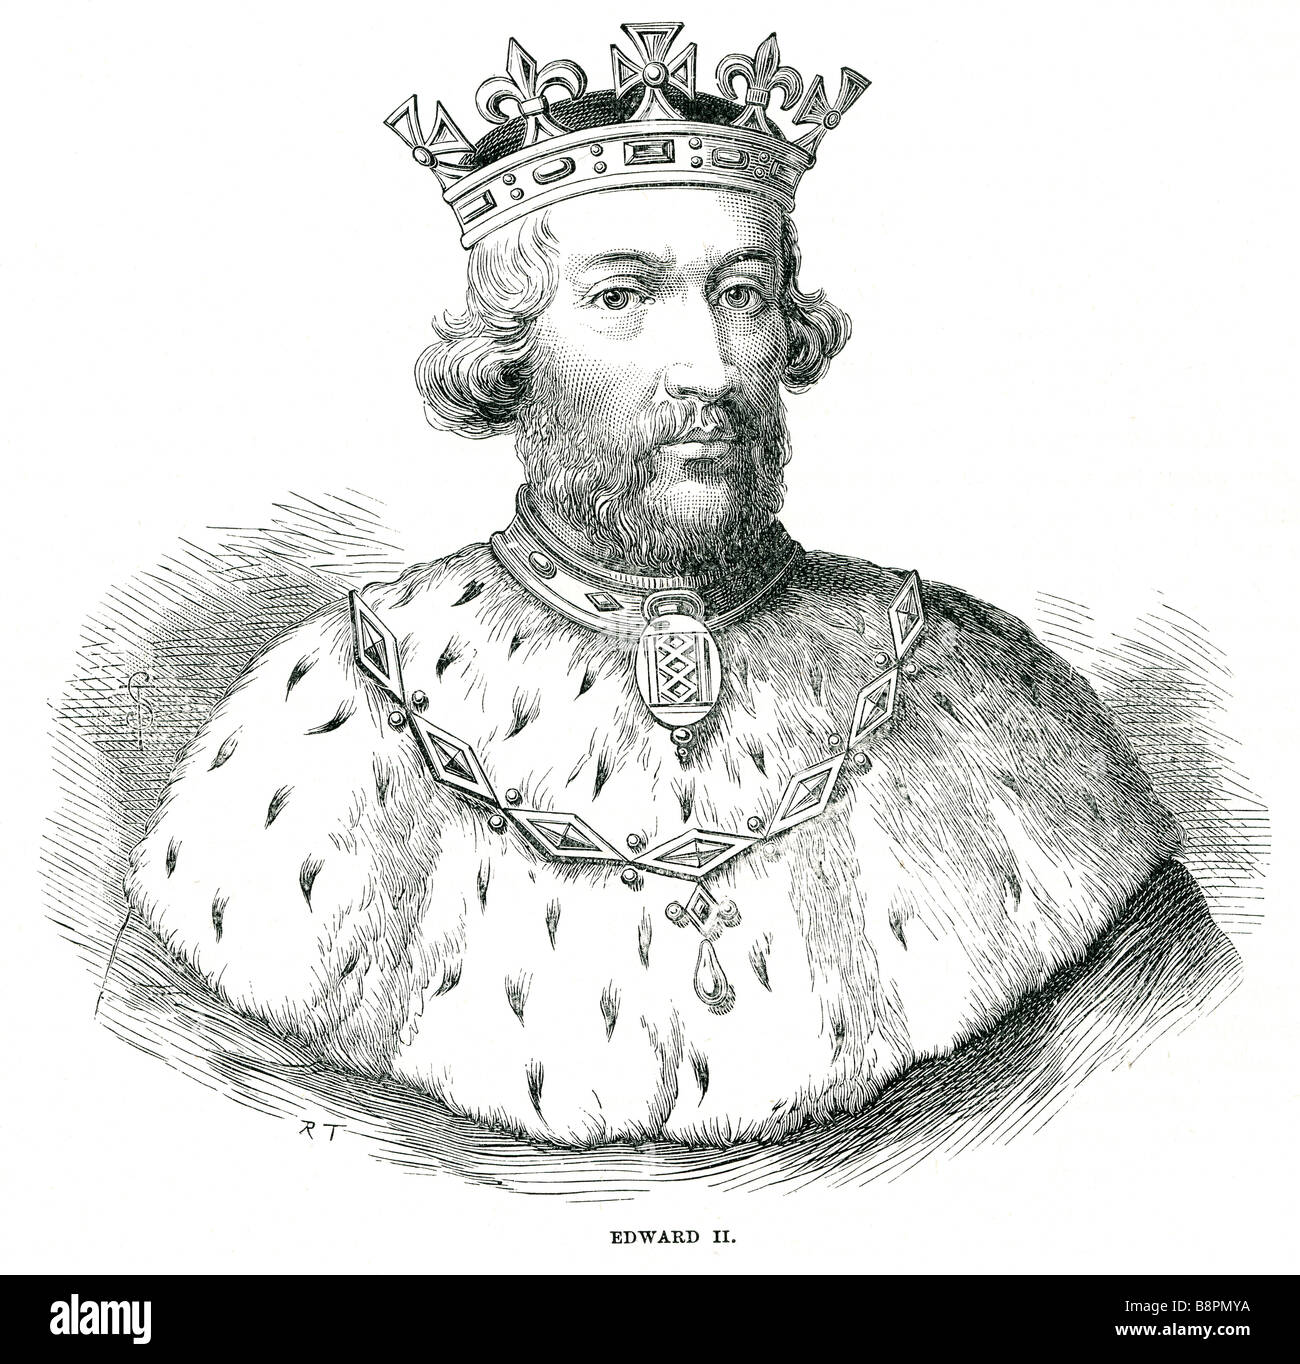 Edward II, (25 April 1284 – 21 September 1327?) called Edward of Carnarvon, was King of England from 1307 until he was deposed i Stock Photo